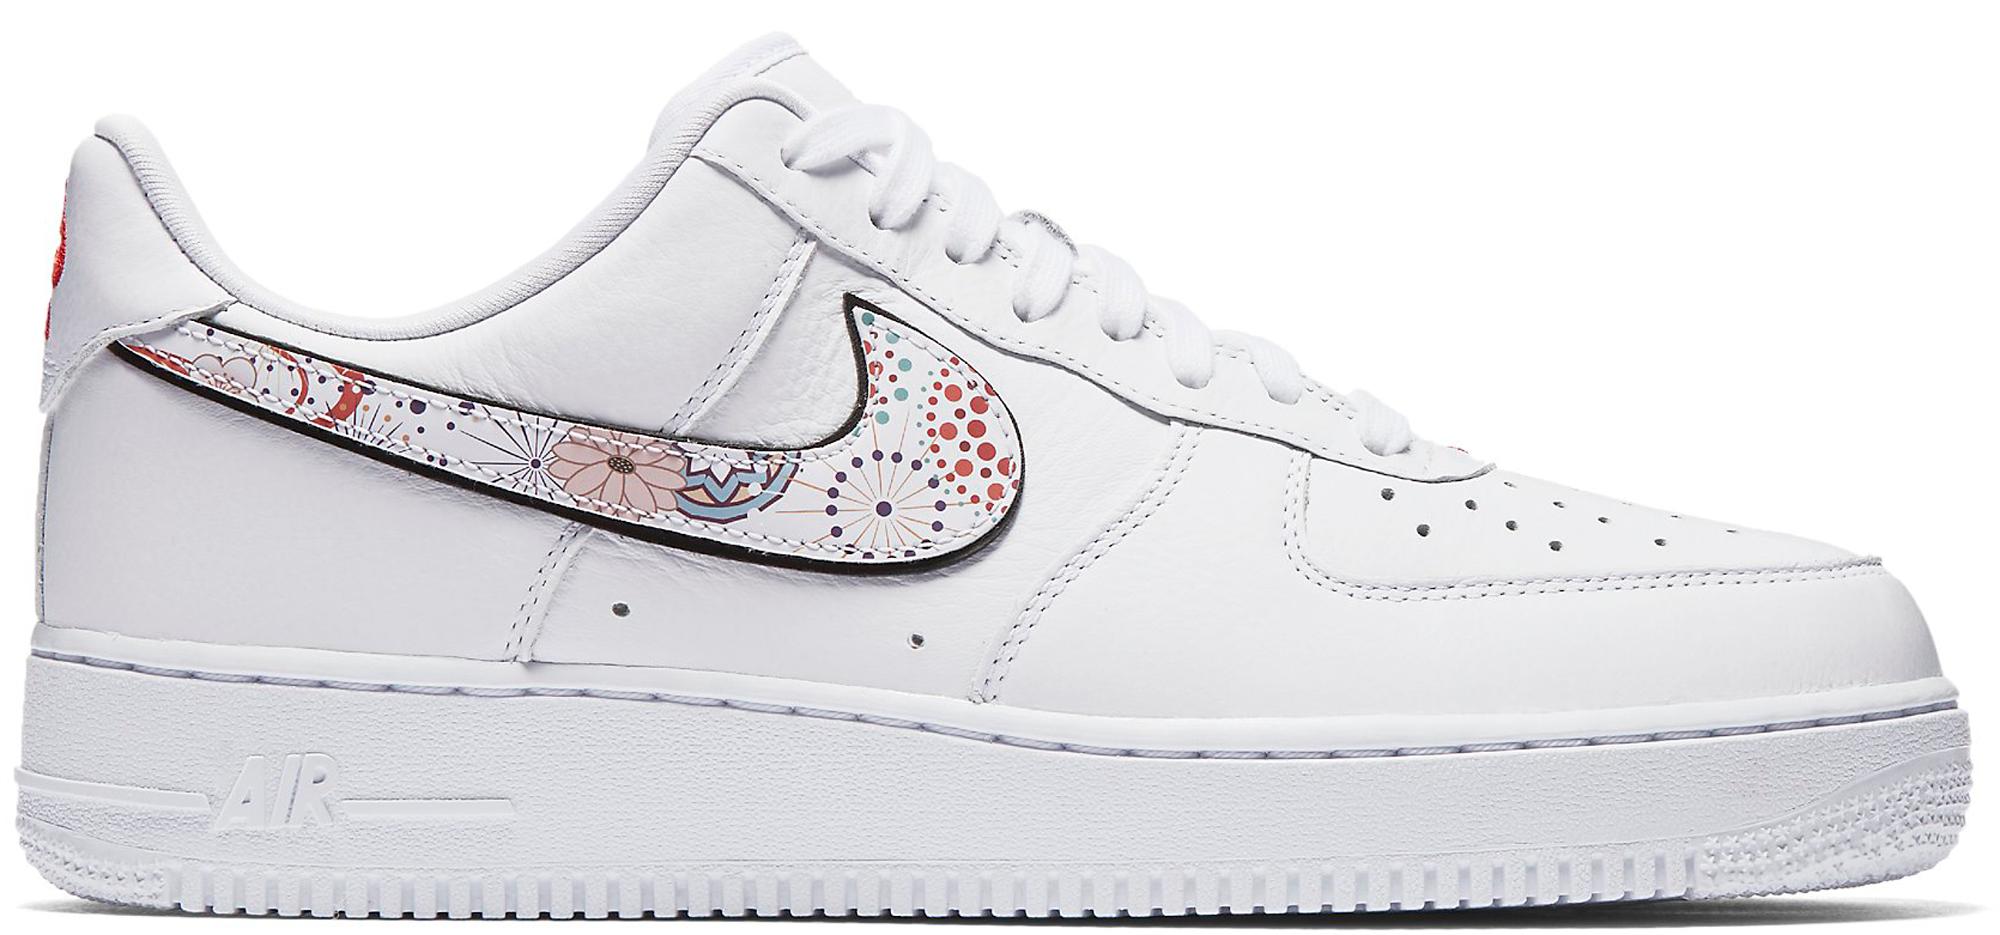 Nike Air Force 1 Low Lunar New Year 2018